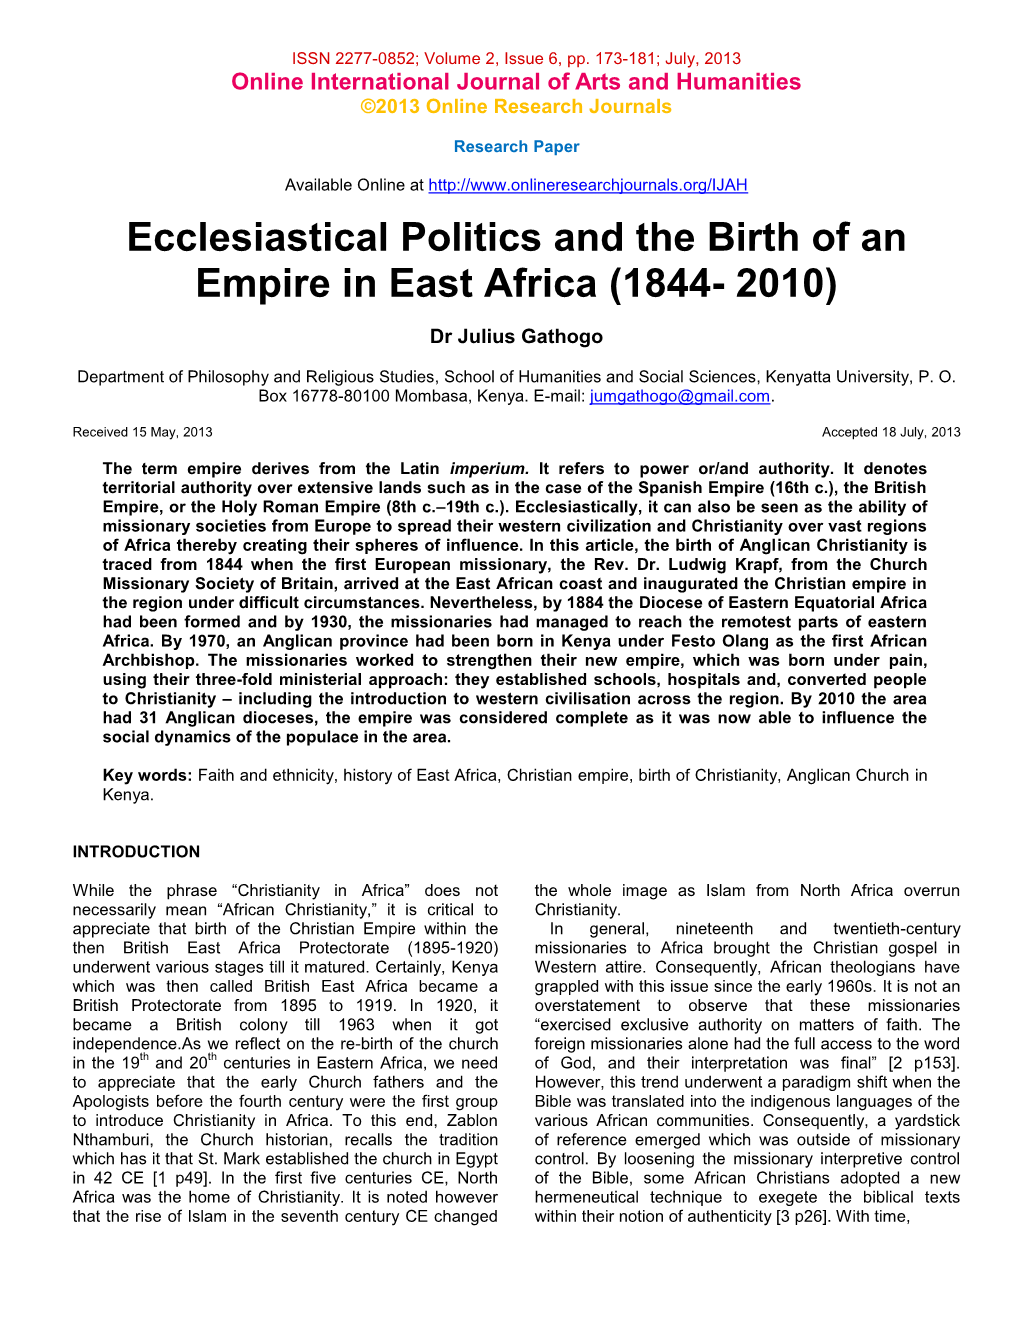 Ecclesiastical Politics and the Birth of an Empire in East Africa (1844- 2010)